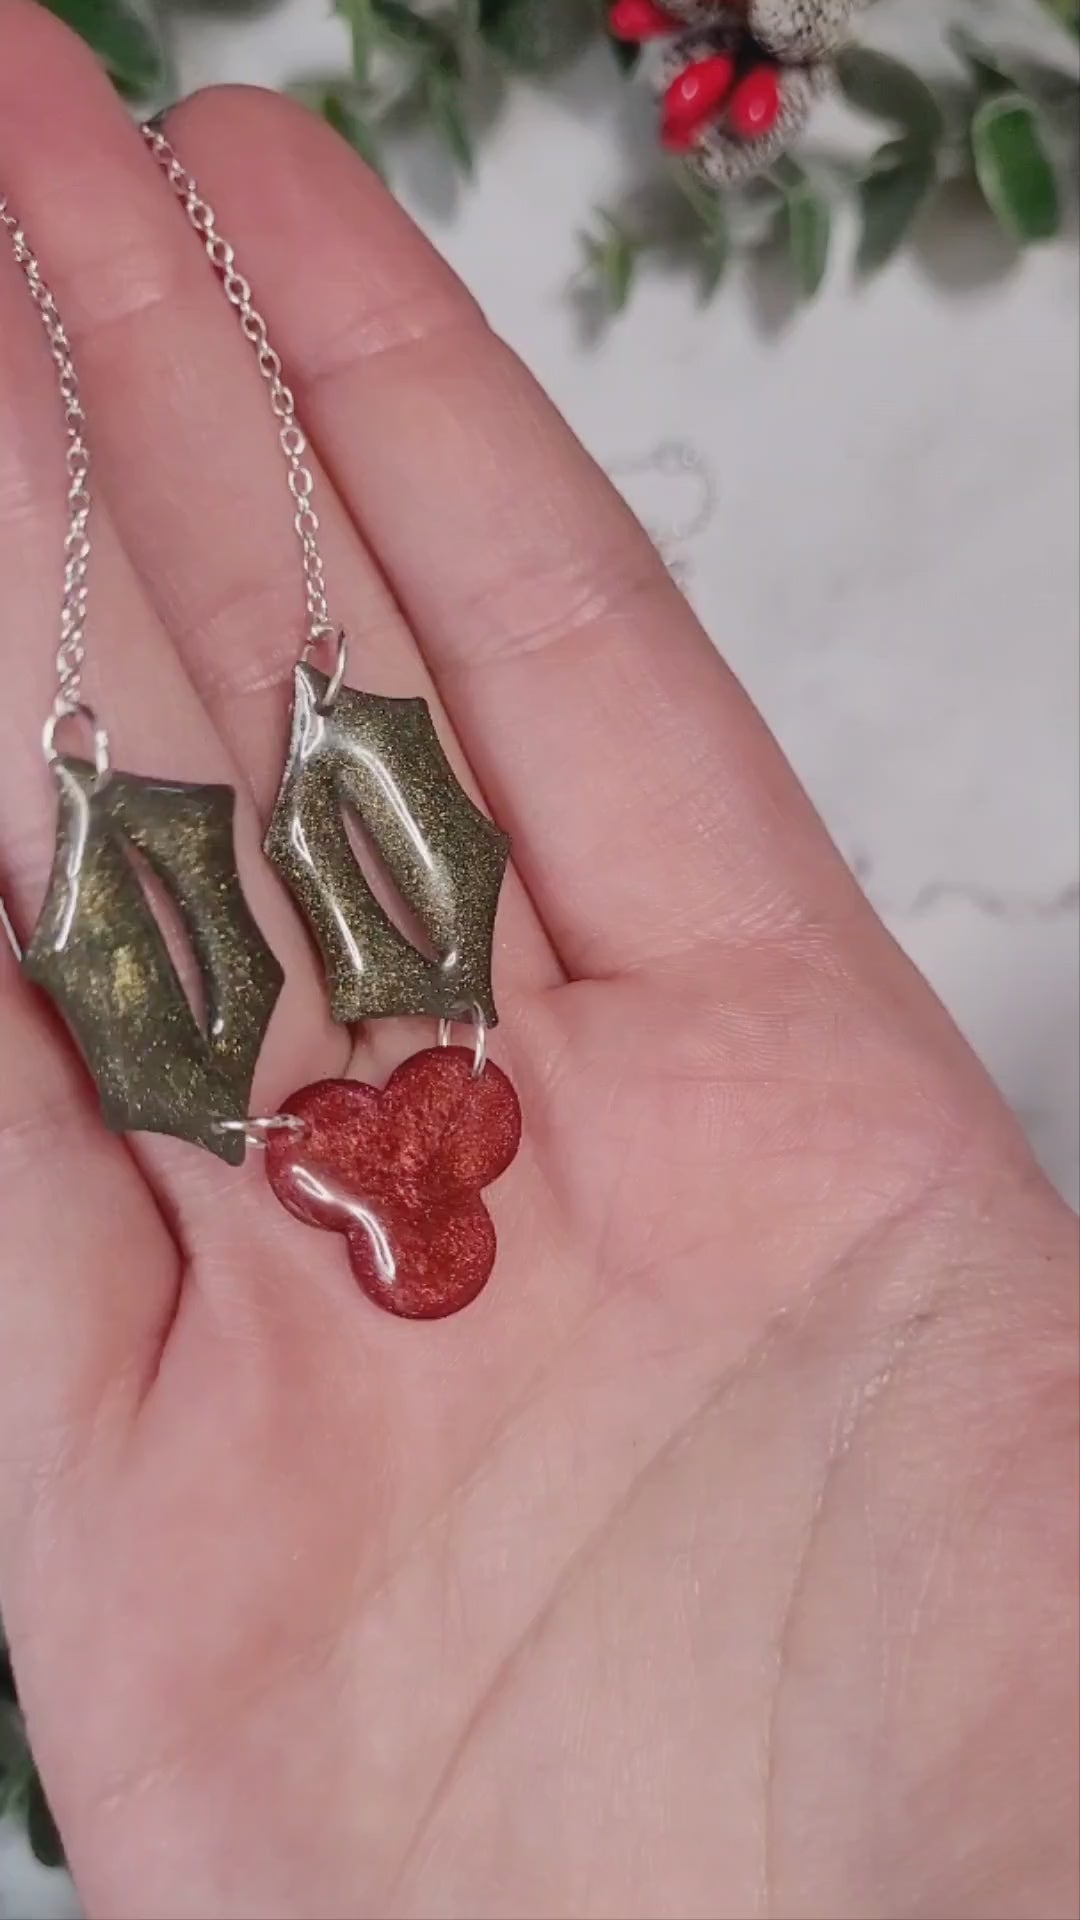 video close up of Glitter holly sprig necklace on a marble background surrounded by foliage,